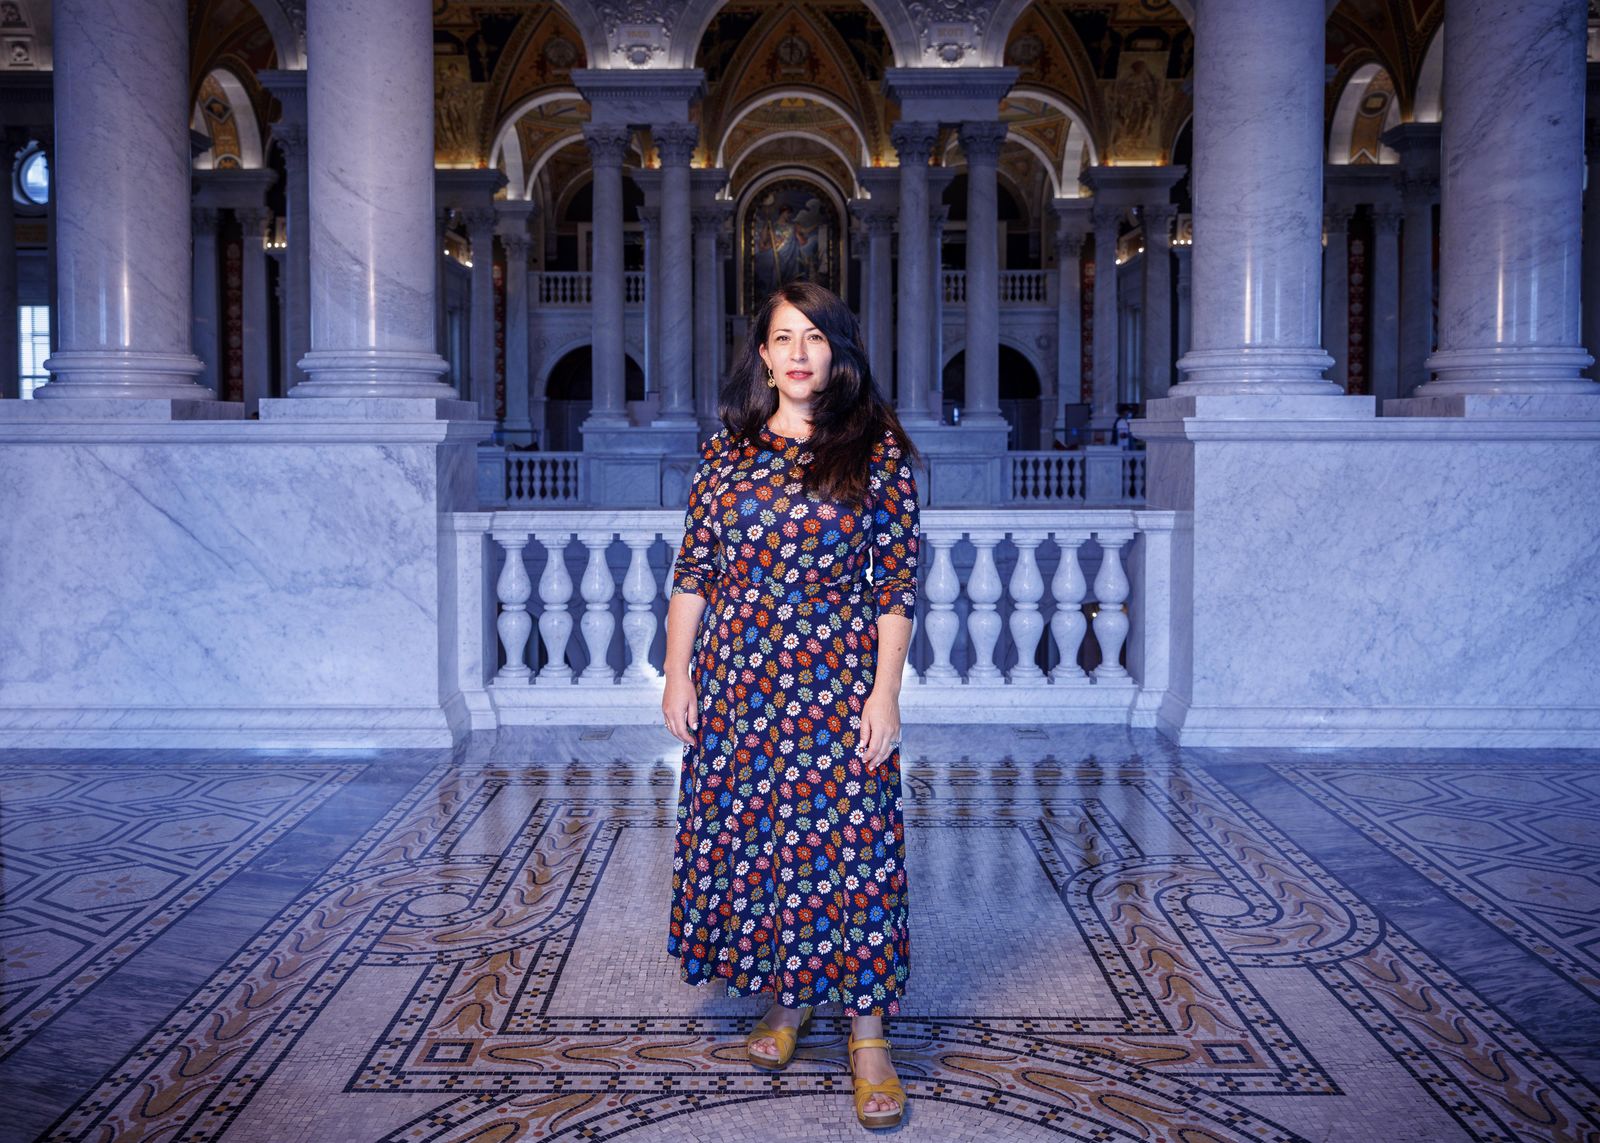 Librarian of Congress Names Ada Limón the Nation's 24th U.S. Poet Laureate